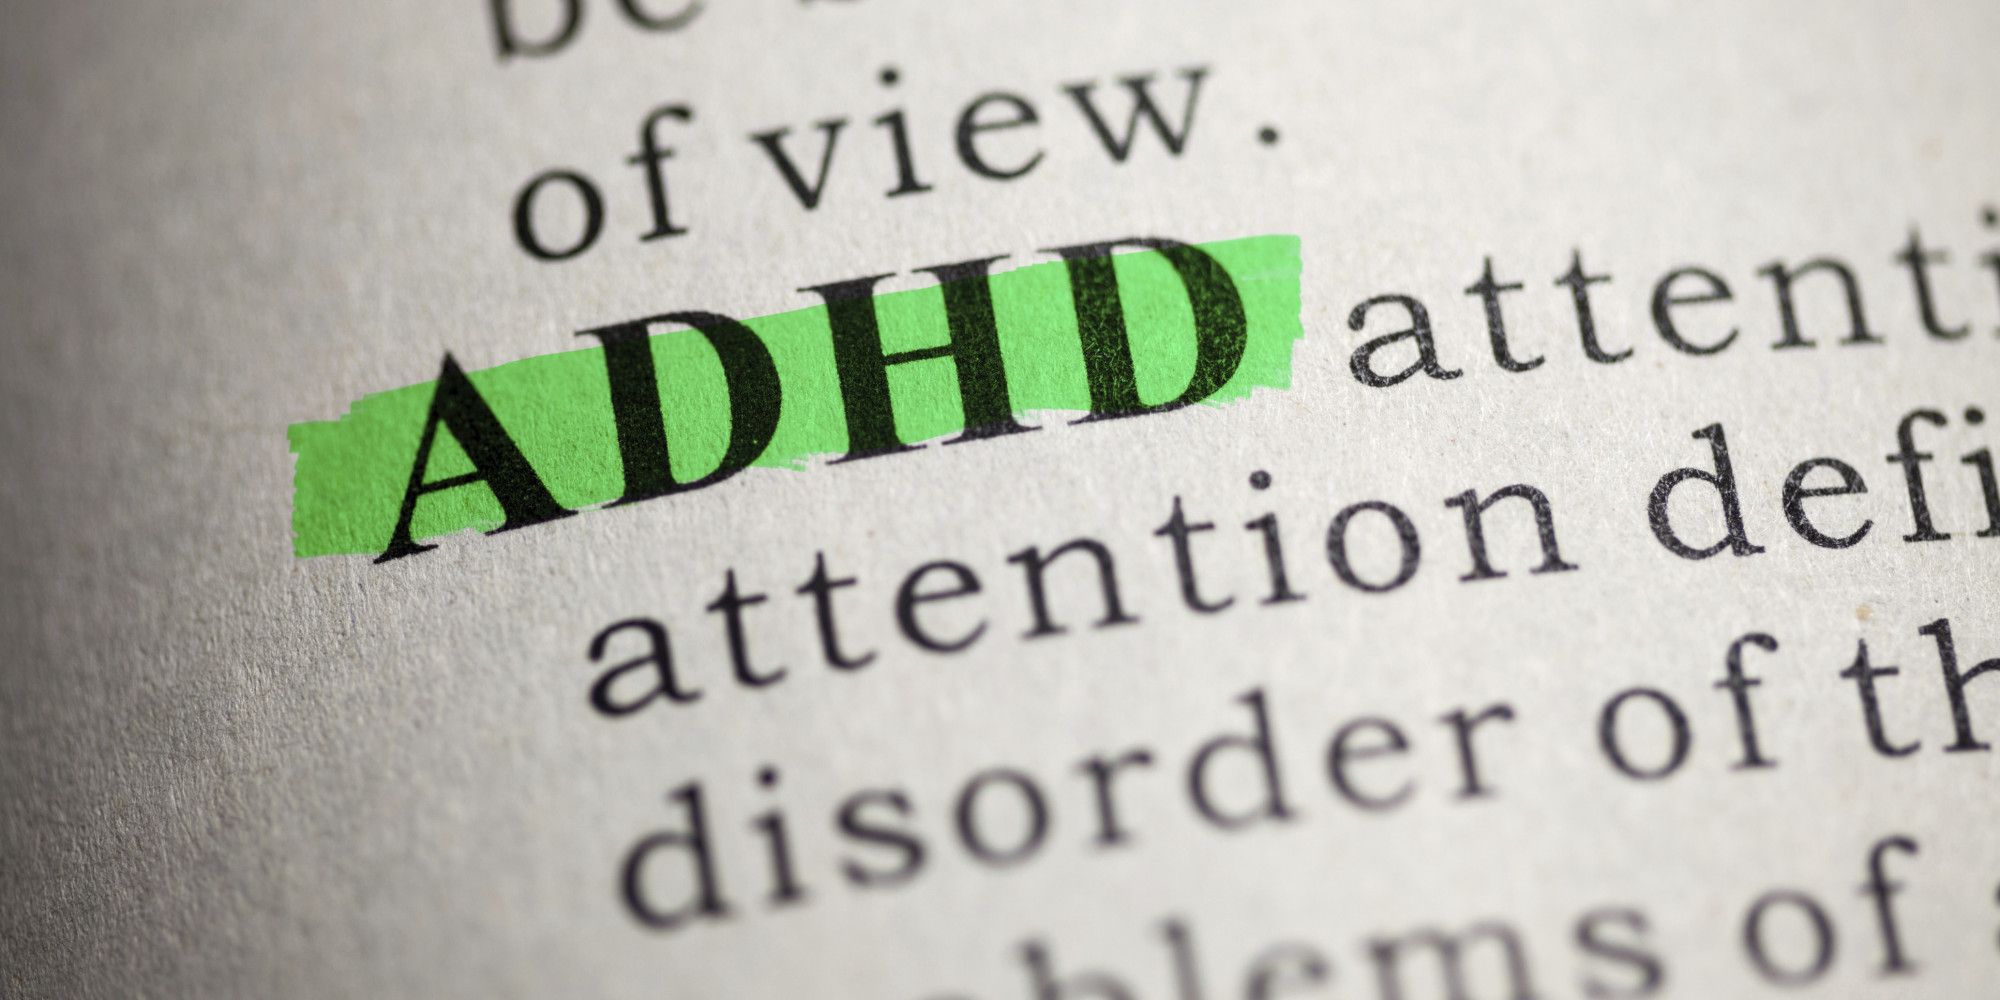 Creating ADHD is the goal of education